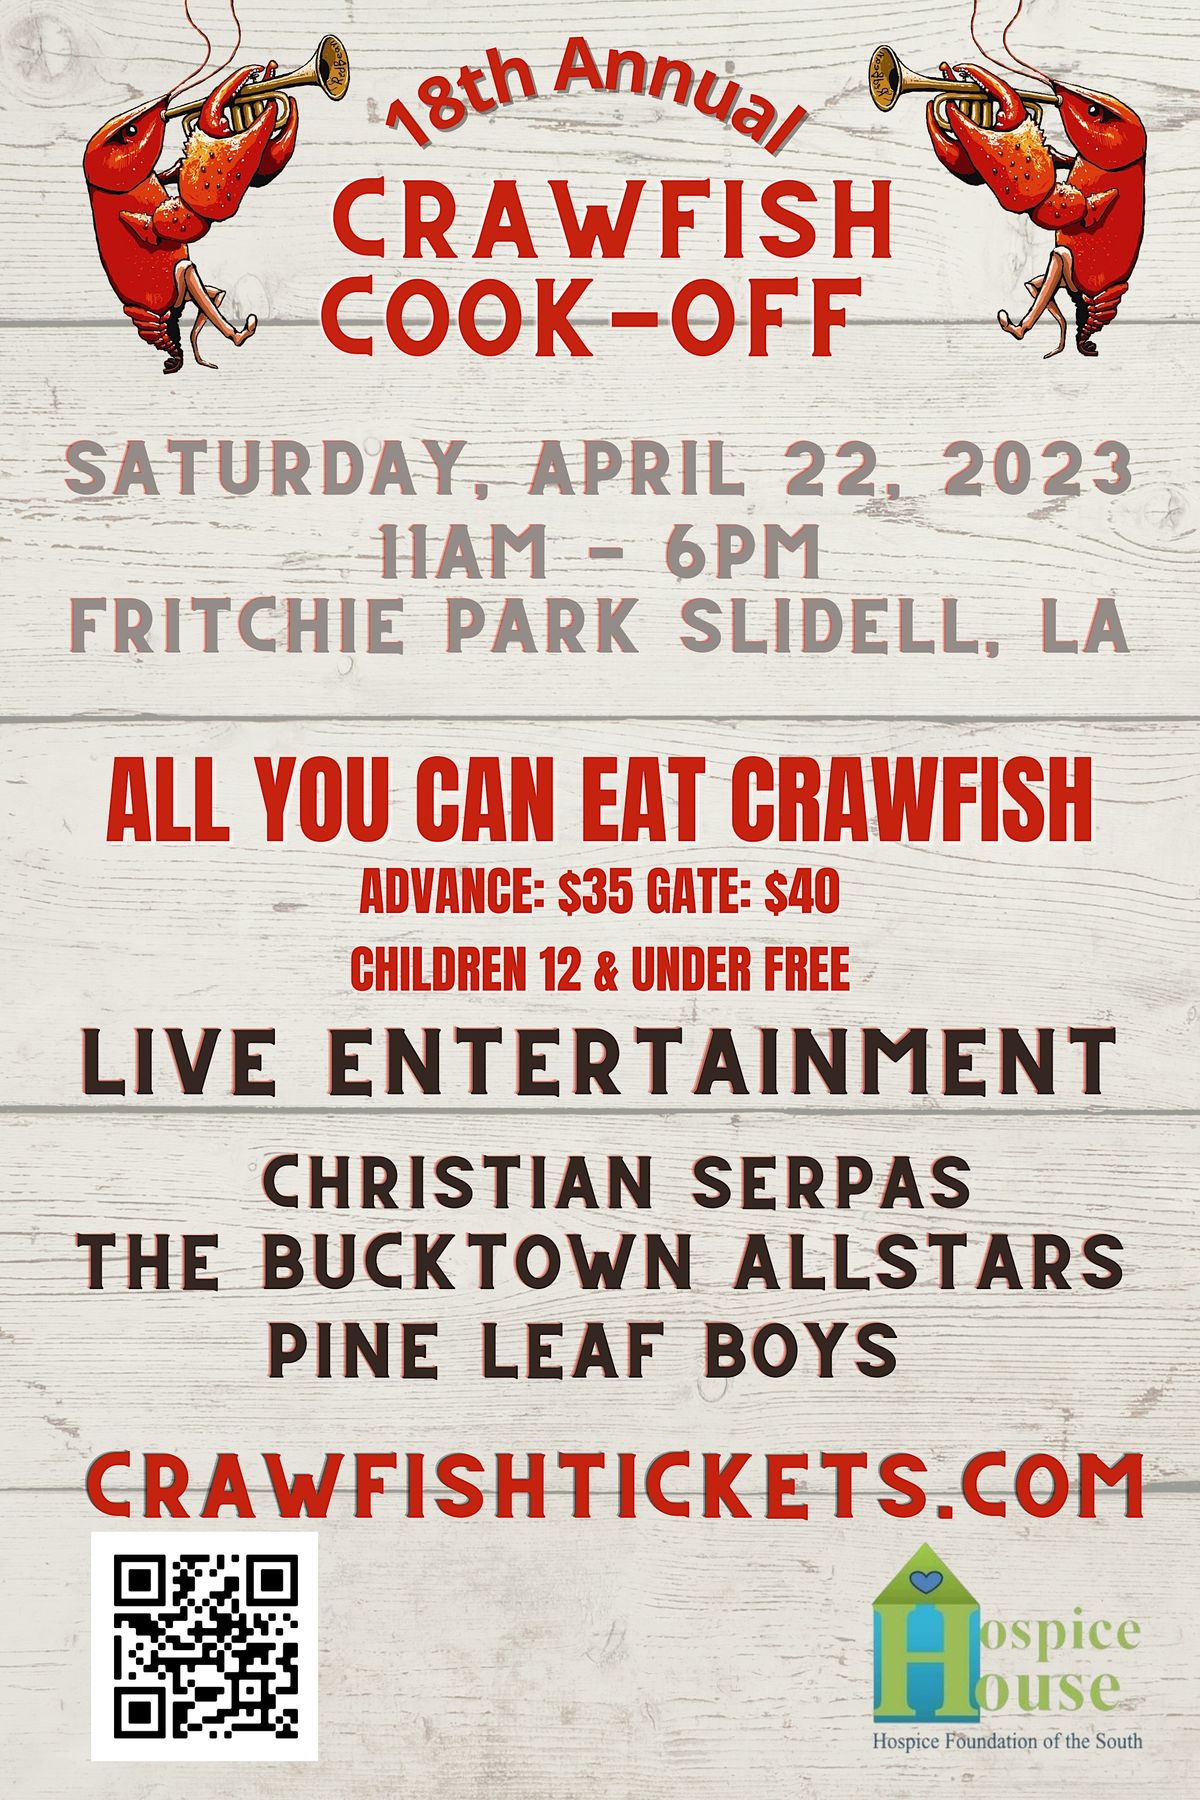 18th Annual Crawfish Cookoff Fritchie Park, Slidell, LA April 22, 2023